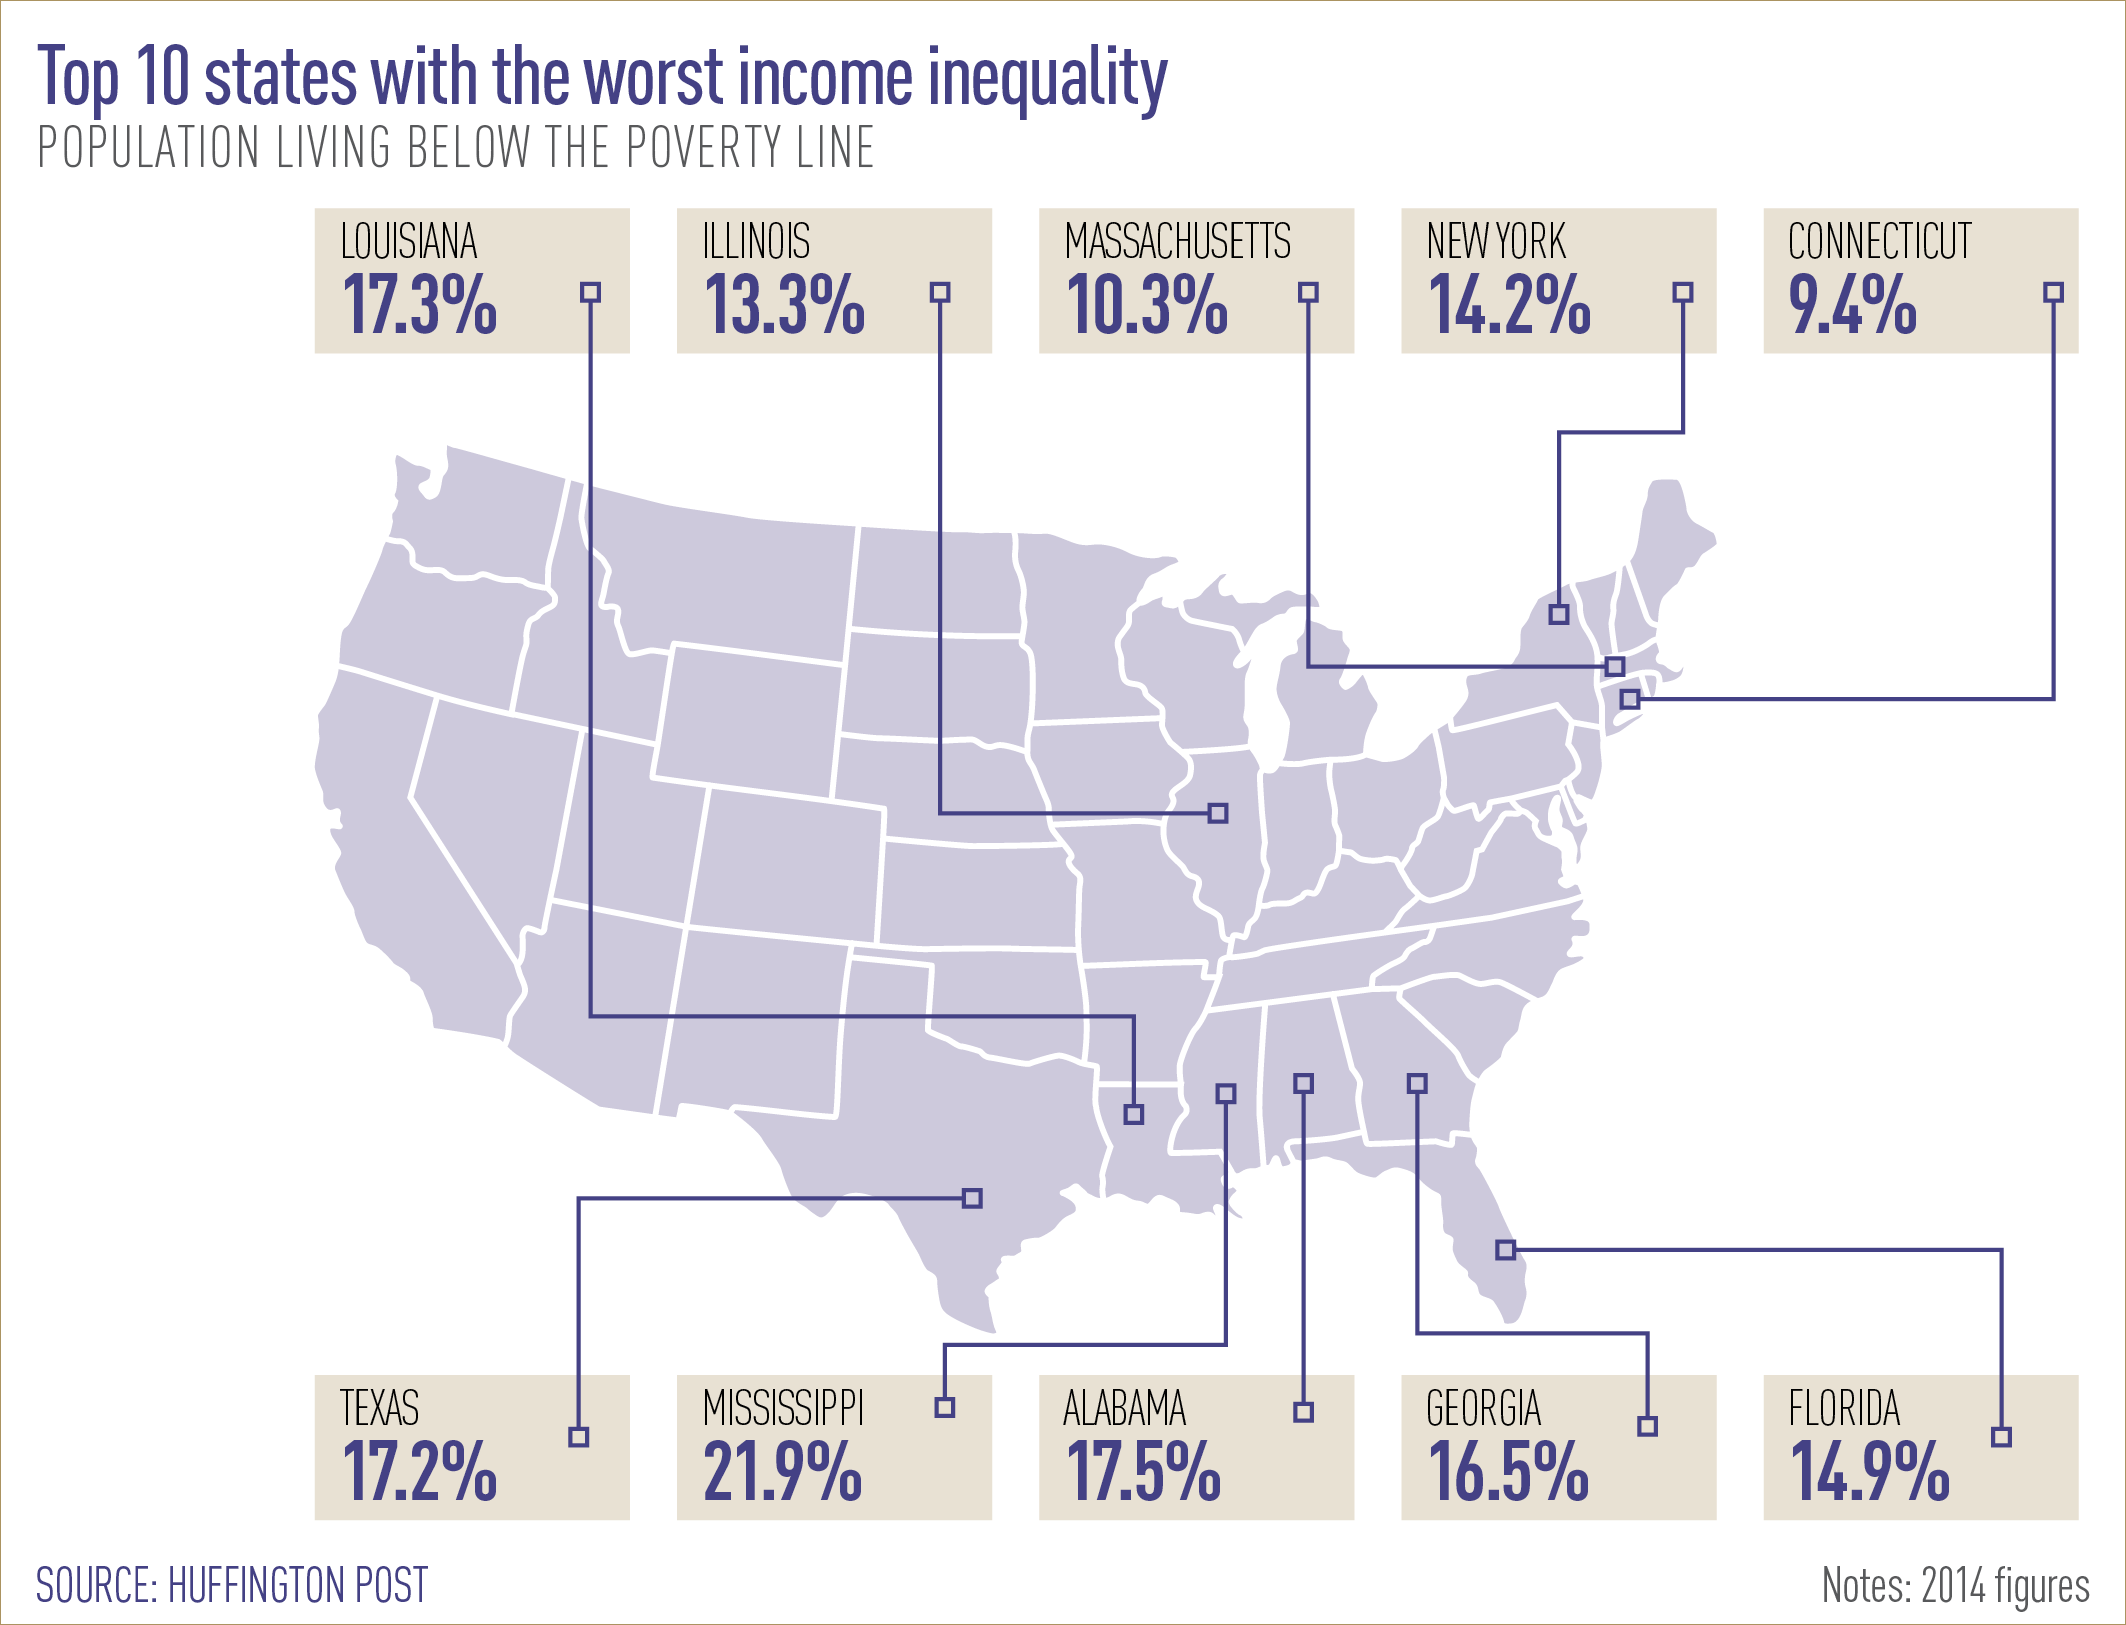 Top 10 states with the worst income inequality